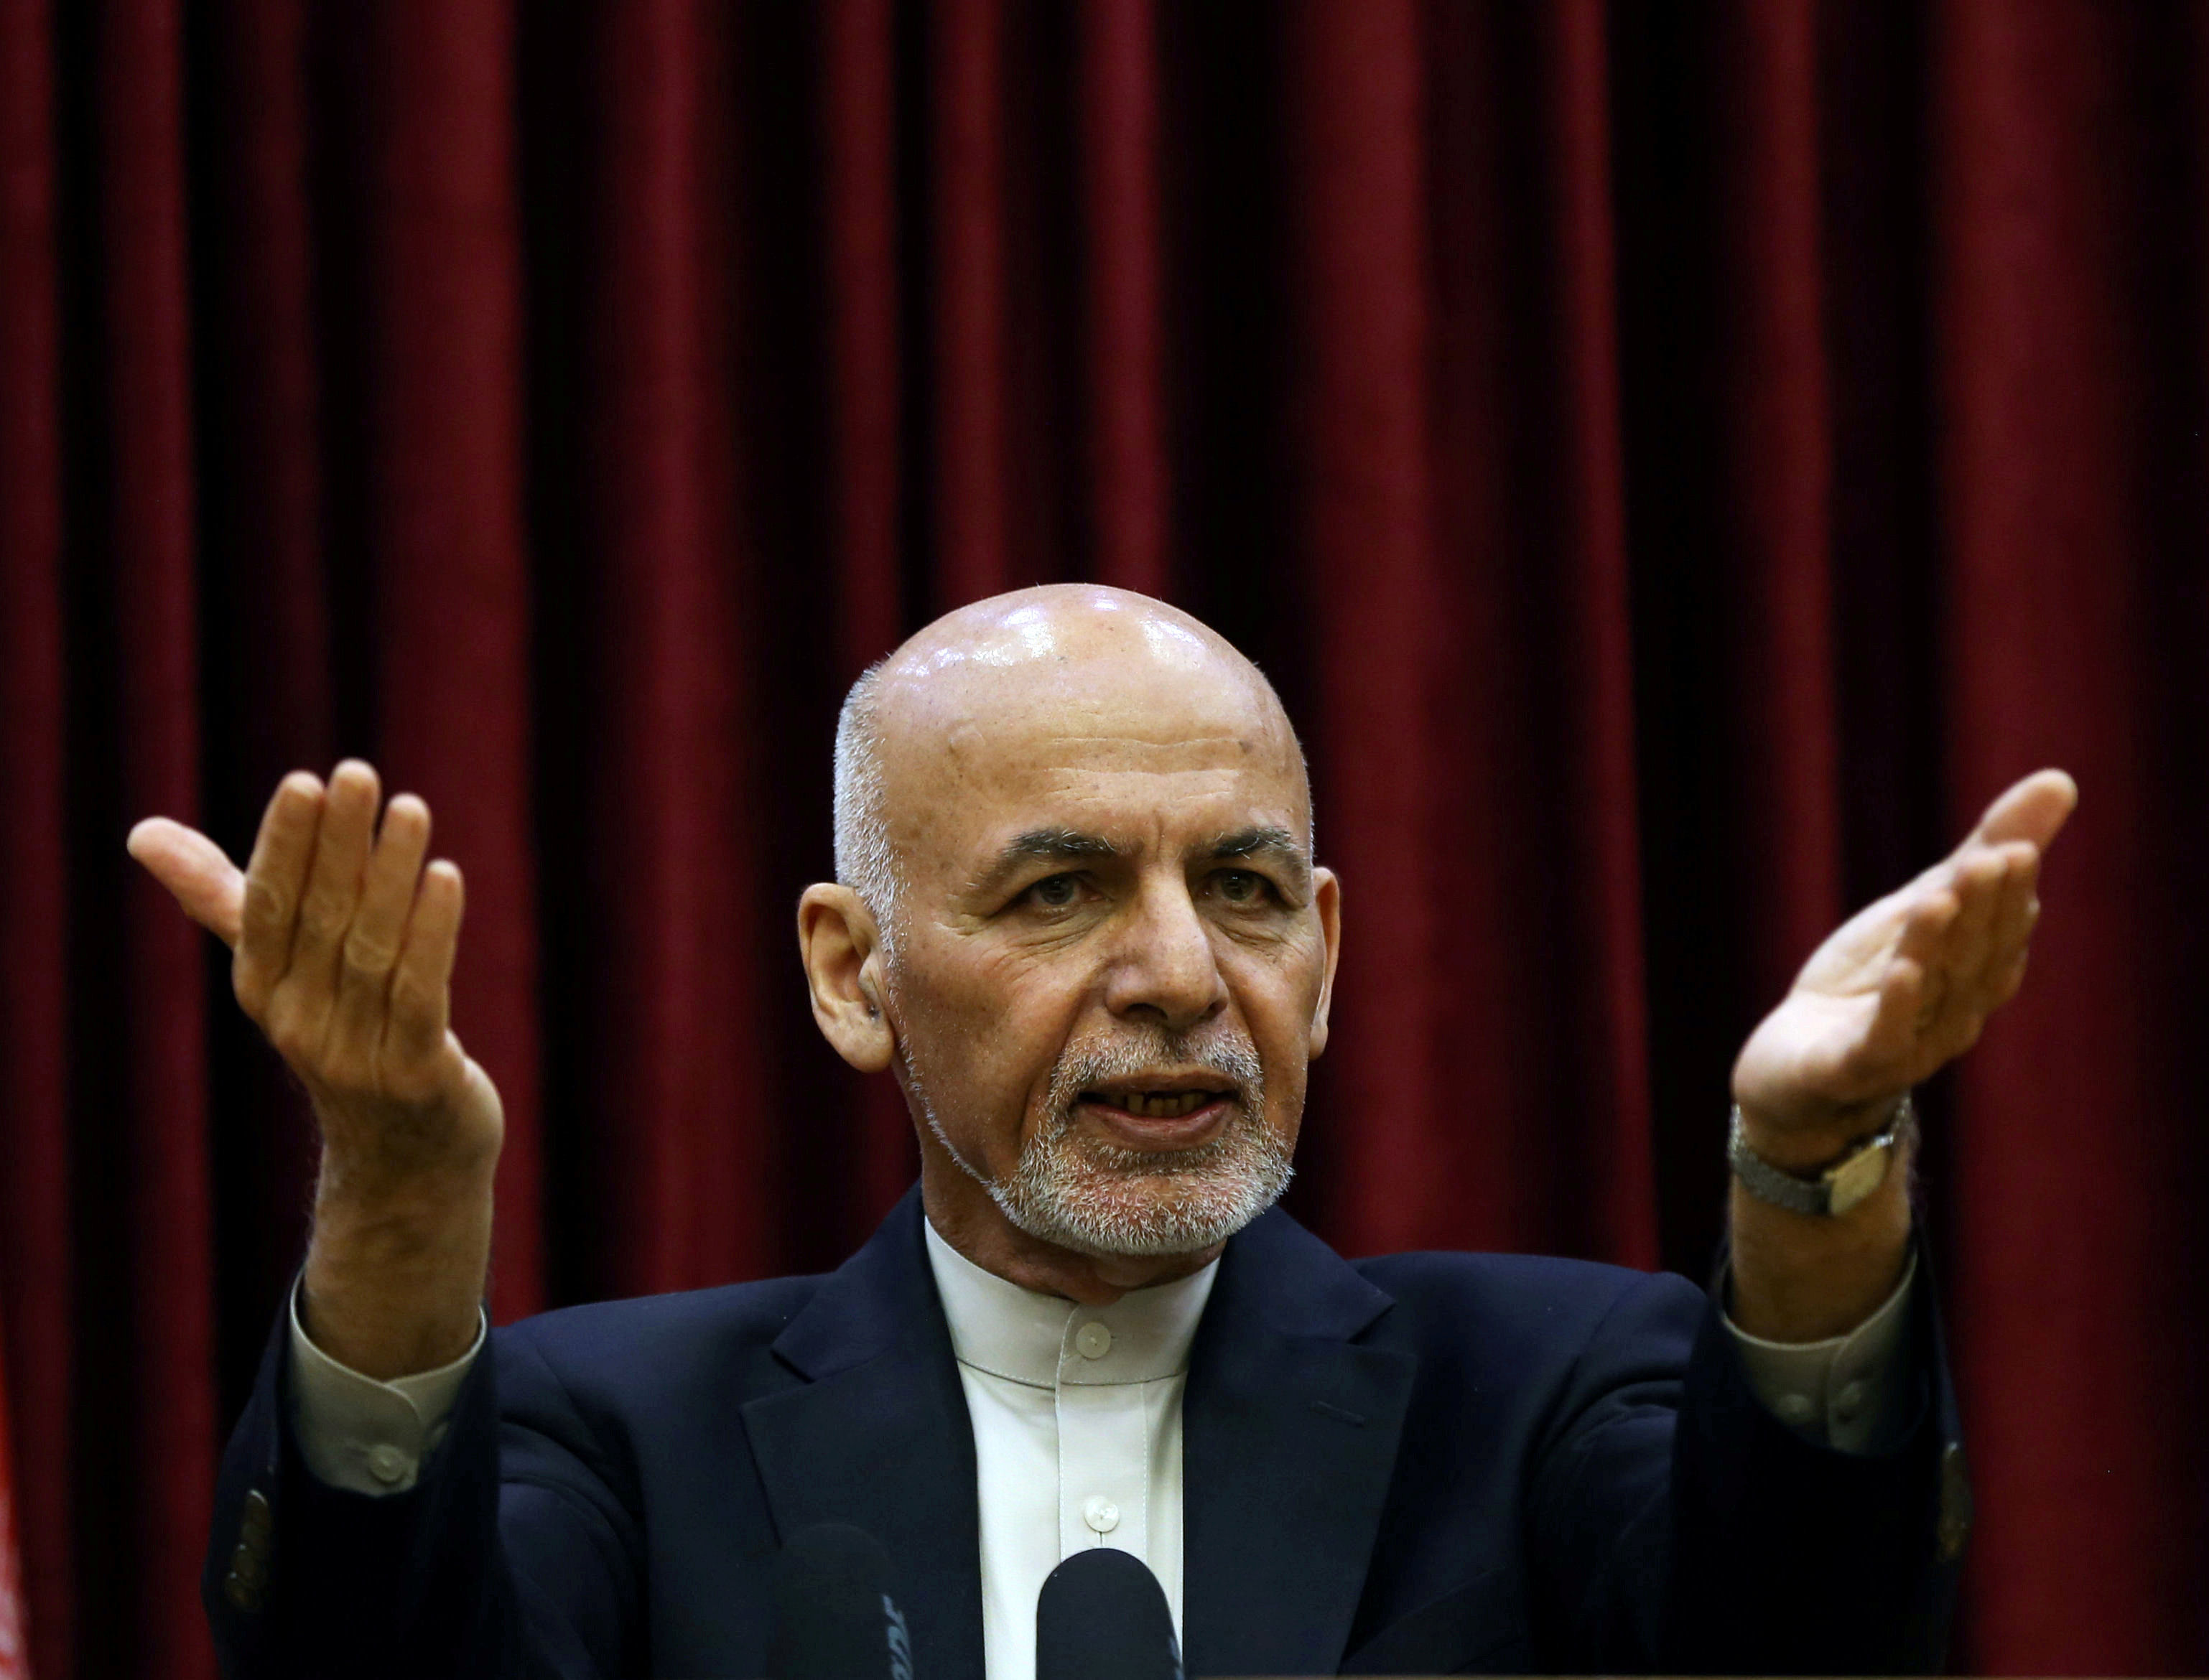 Afghanistan's President Ashraf Ghani speaks during a news conference in Kabul. (Reuters Photo)